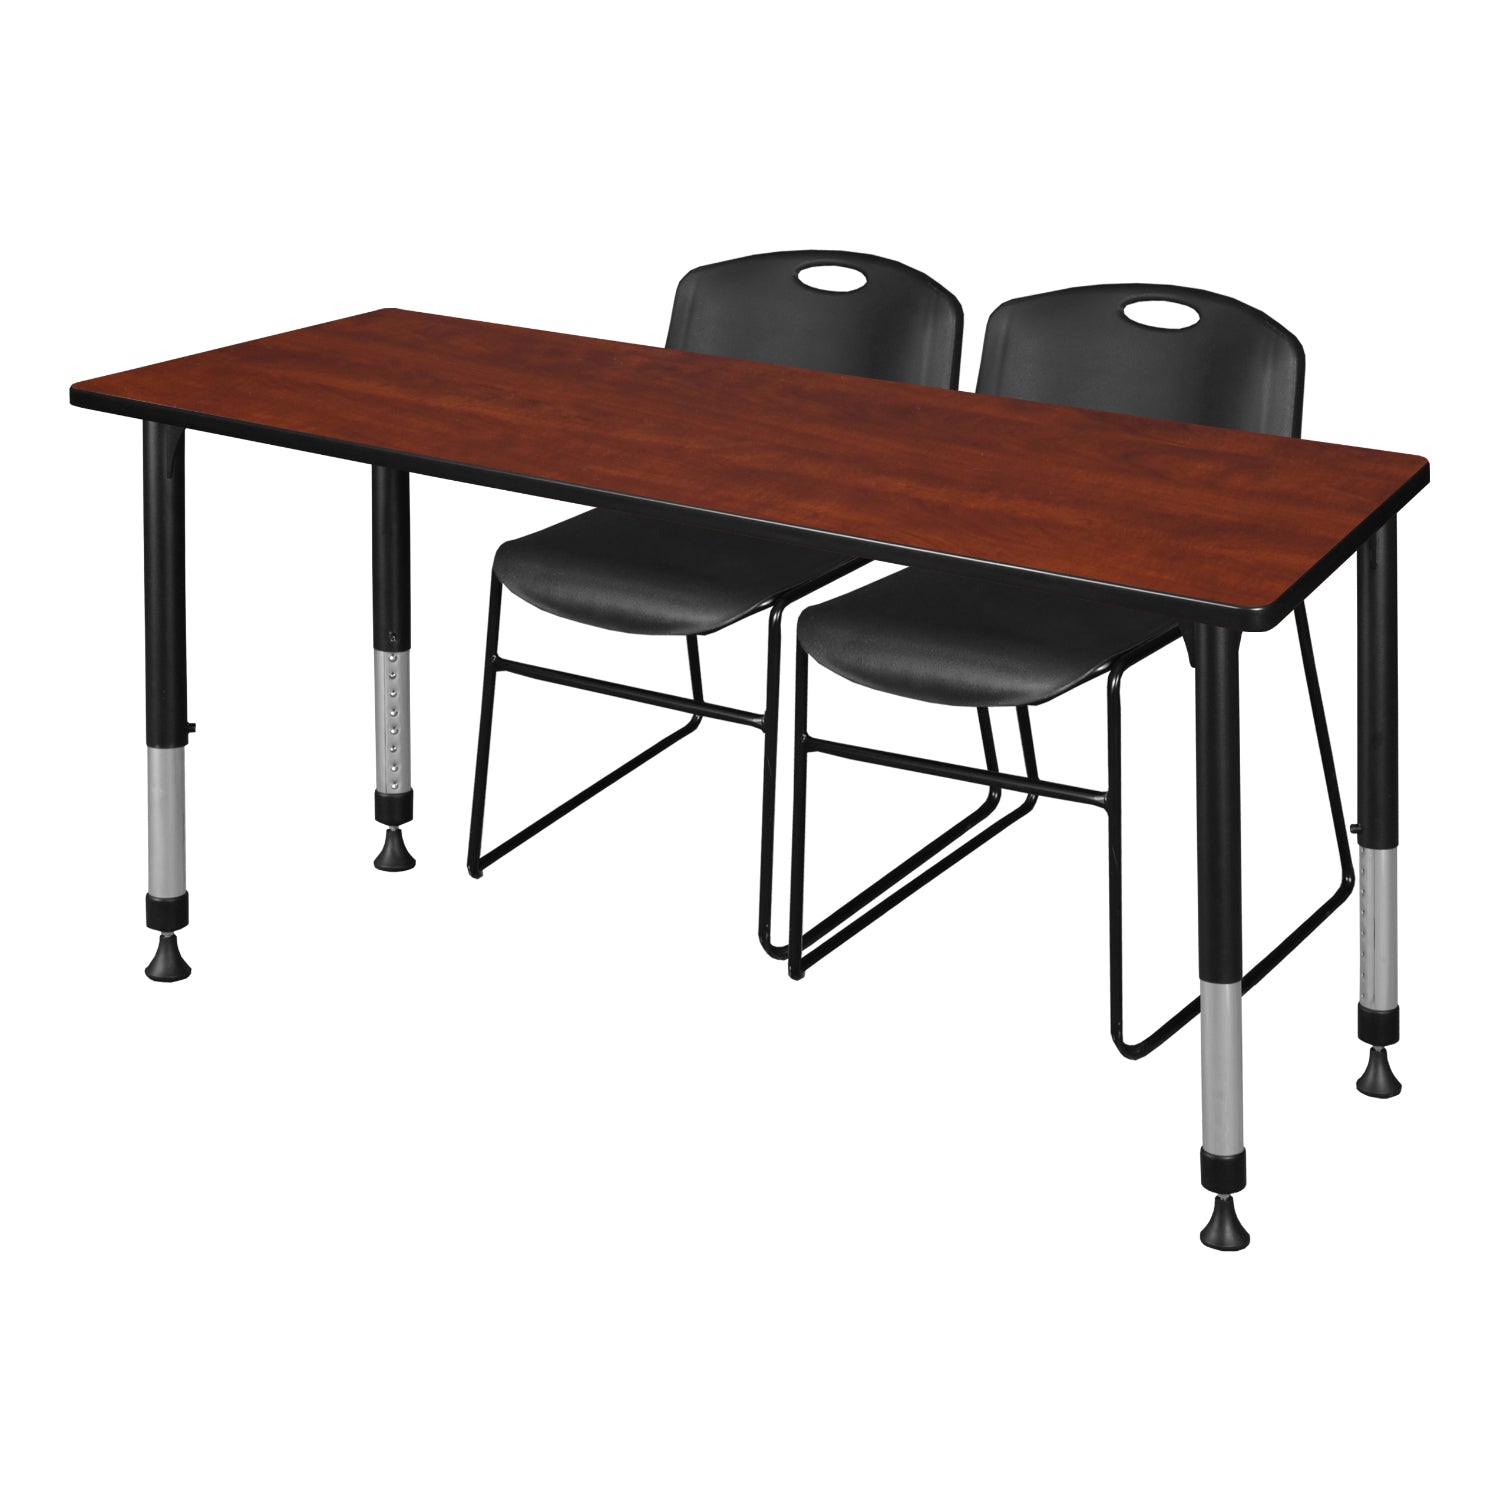 Kee Classroom Table and Chair Package, Kee 66" x 24" Rectangular Adjustable Height Table with 2 Black Zeng Stack Chairs